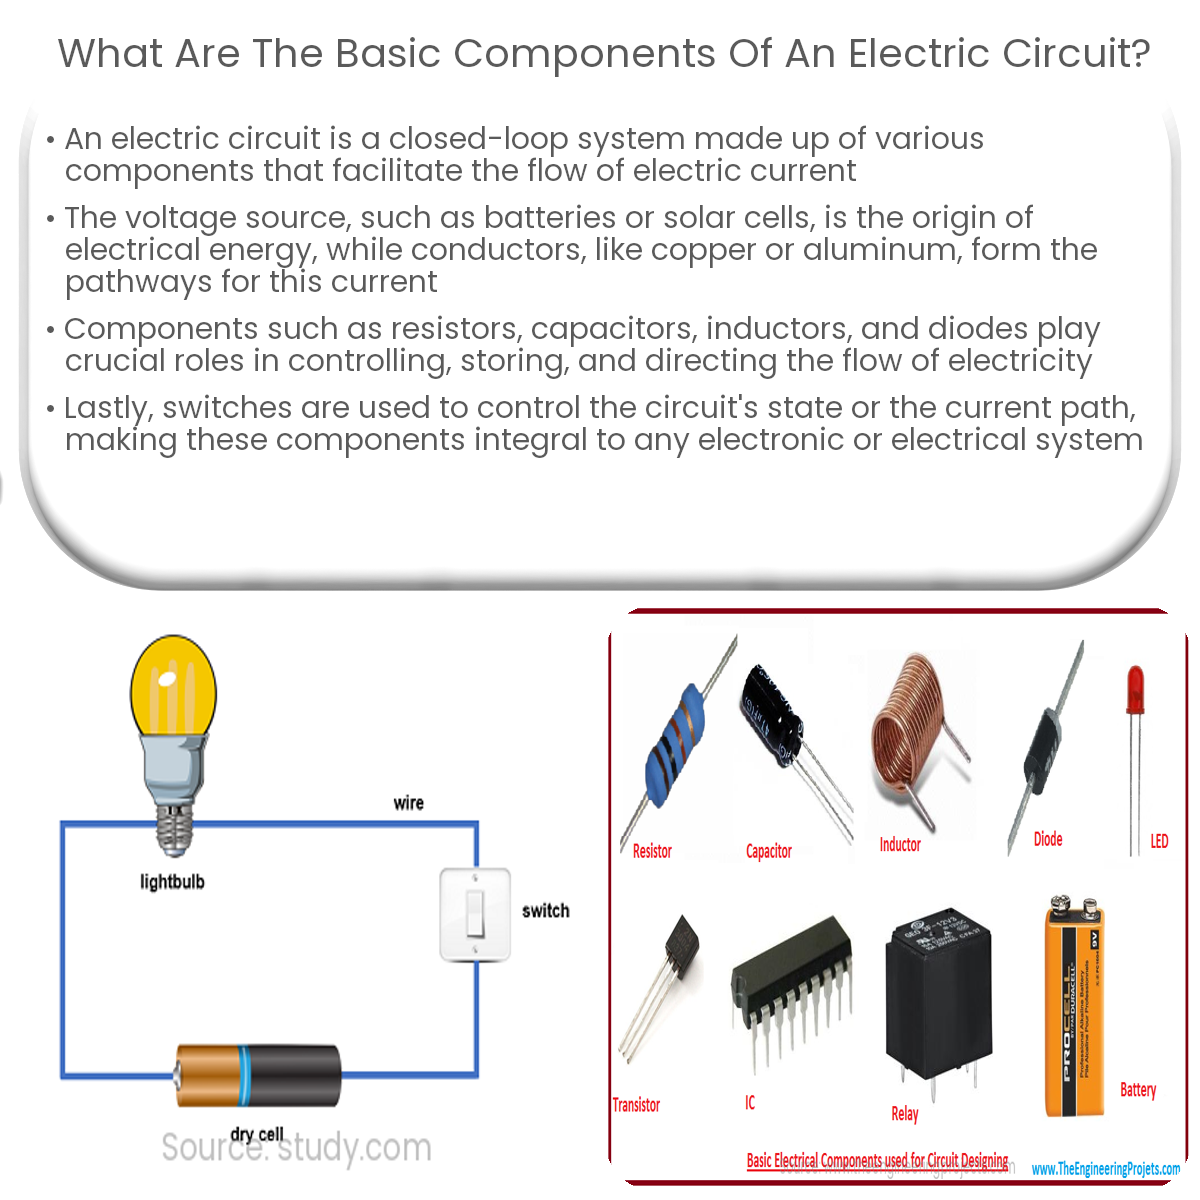 Electric Circuits, Overview, Types & Components - Lesson